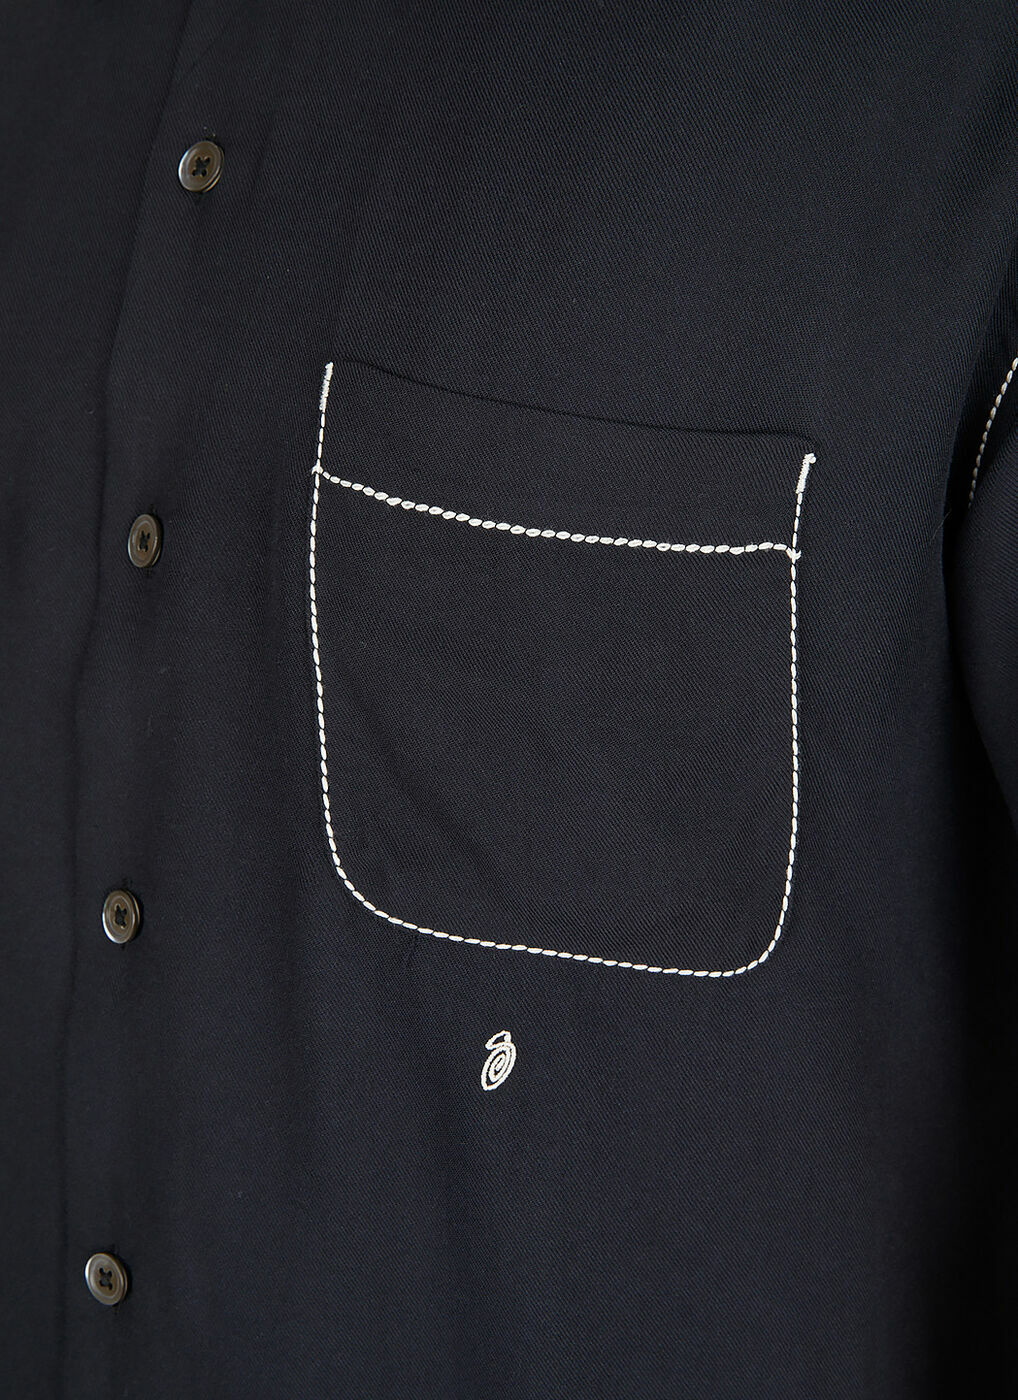 Contrast Pick Stitched Shirt in Black Stussy